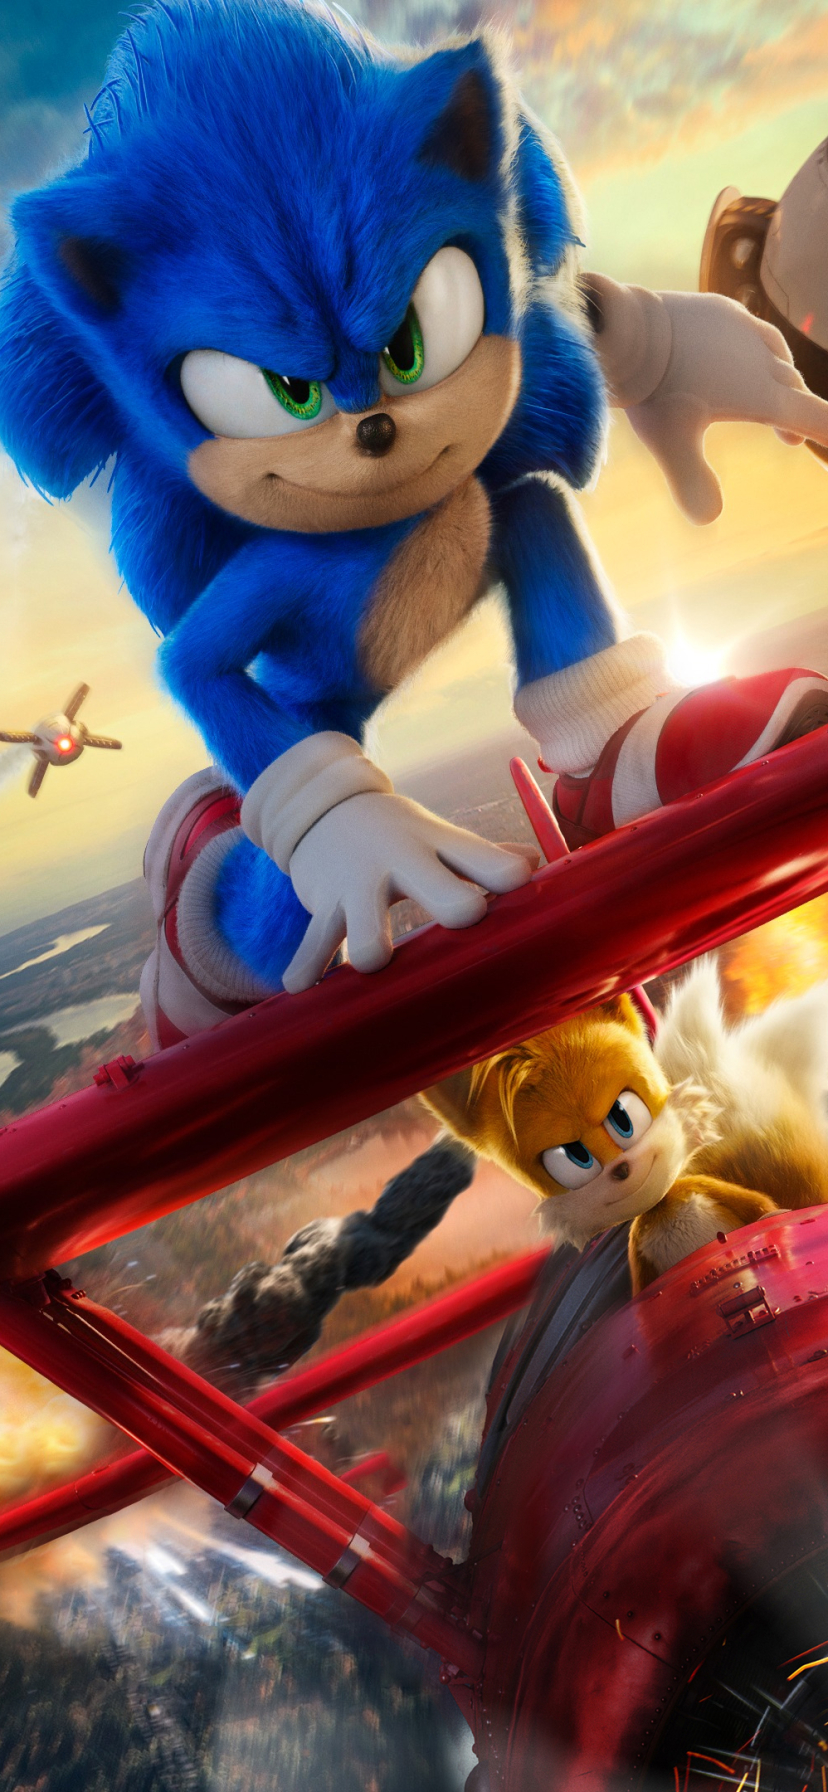 Sonic the Hedgehog 2 Movie Poster sonic the hedgehog 2 2022 poster HD  phone wallpaper  Pxfuel